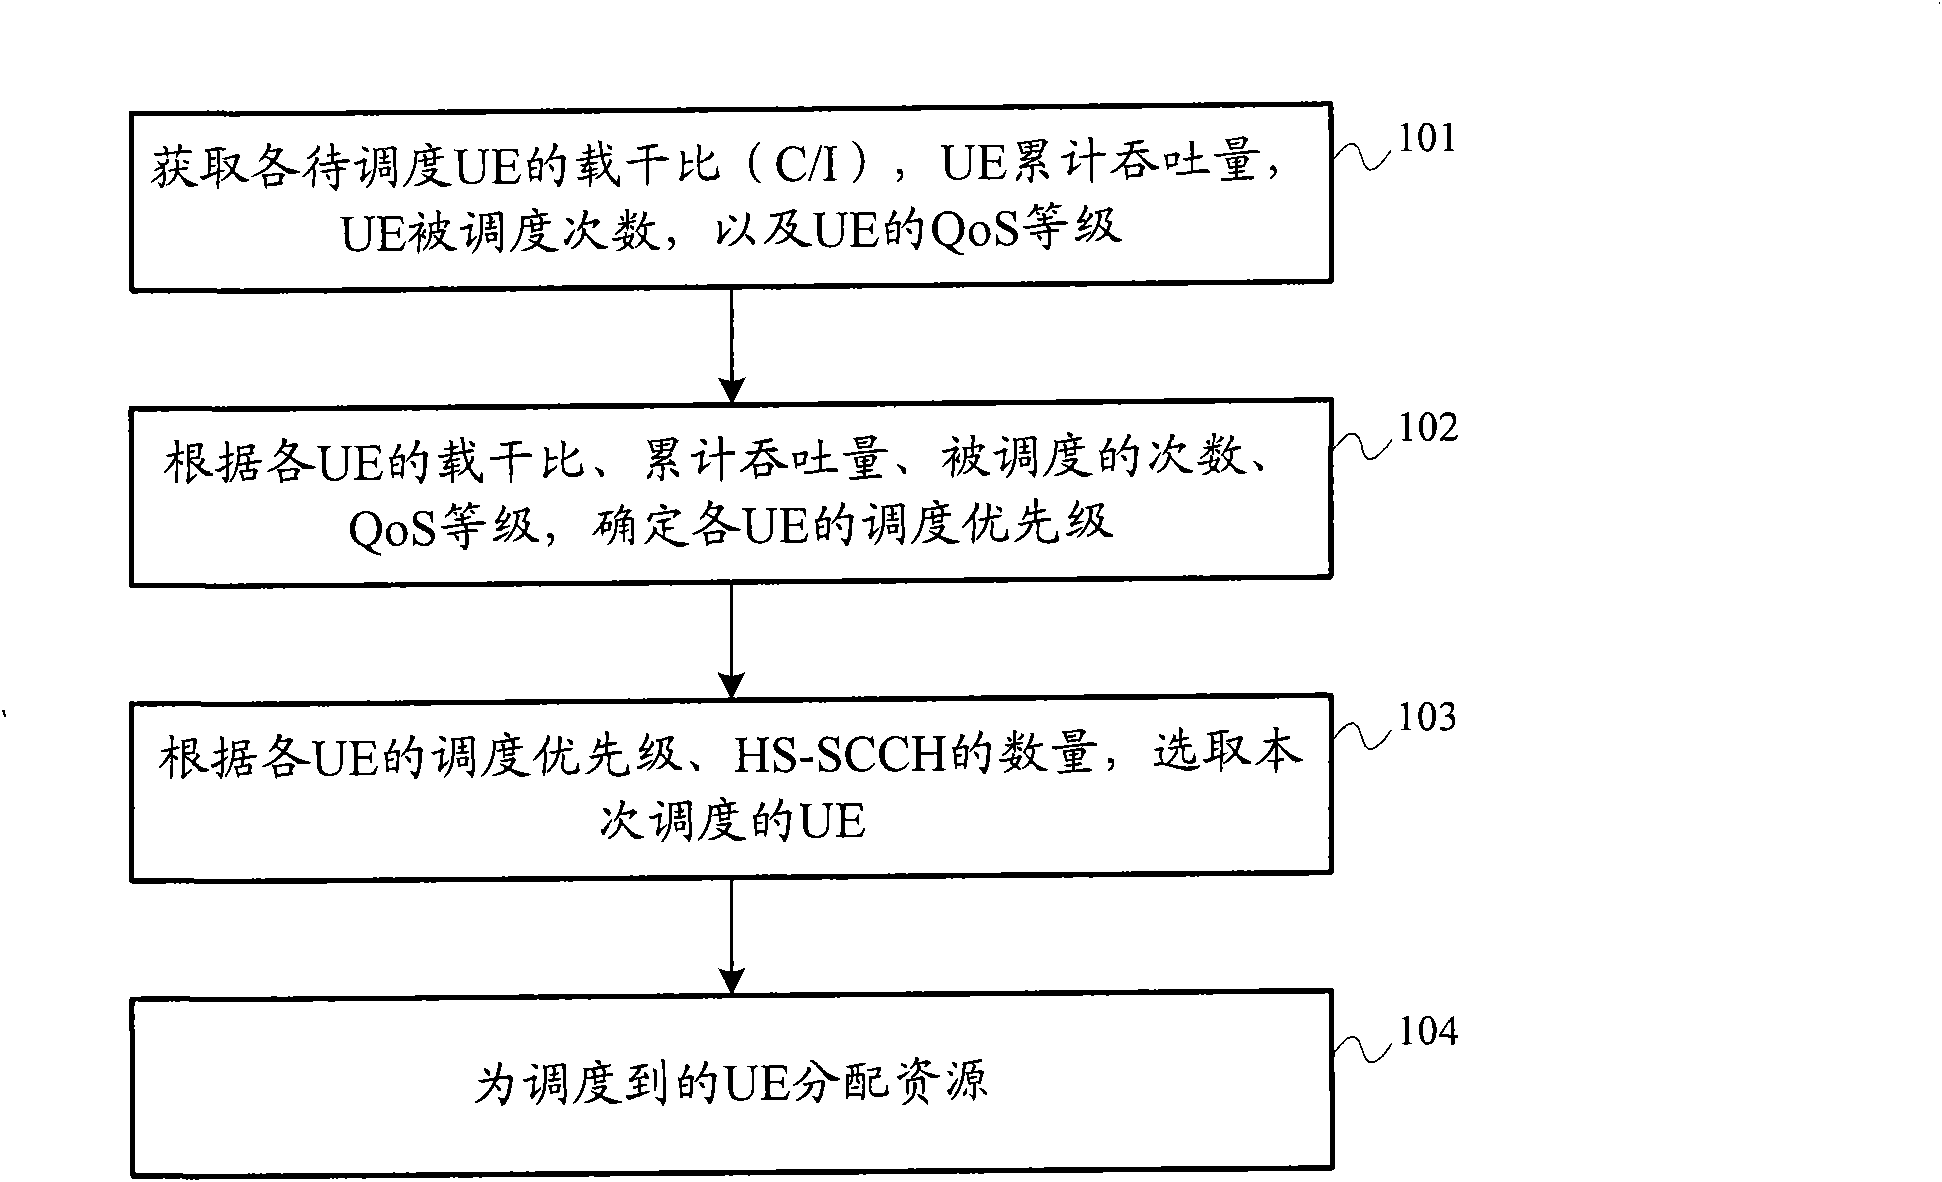 Resource scheduling method and device based on HSDPA (high speed downlink packet access)